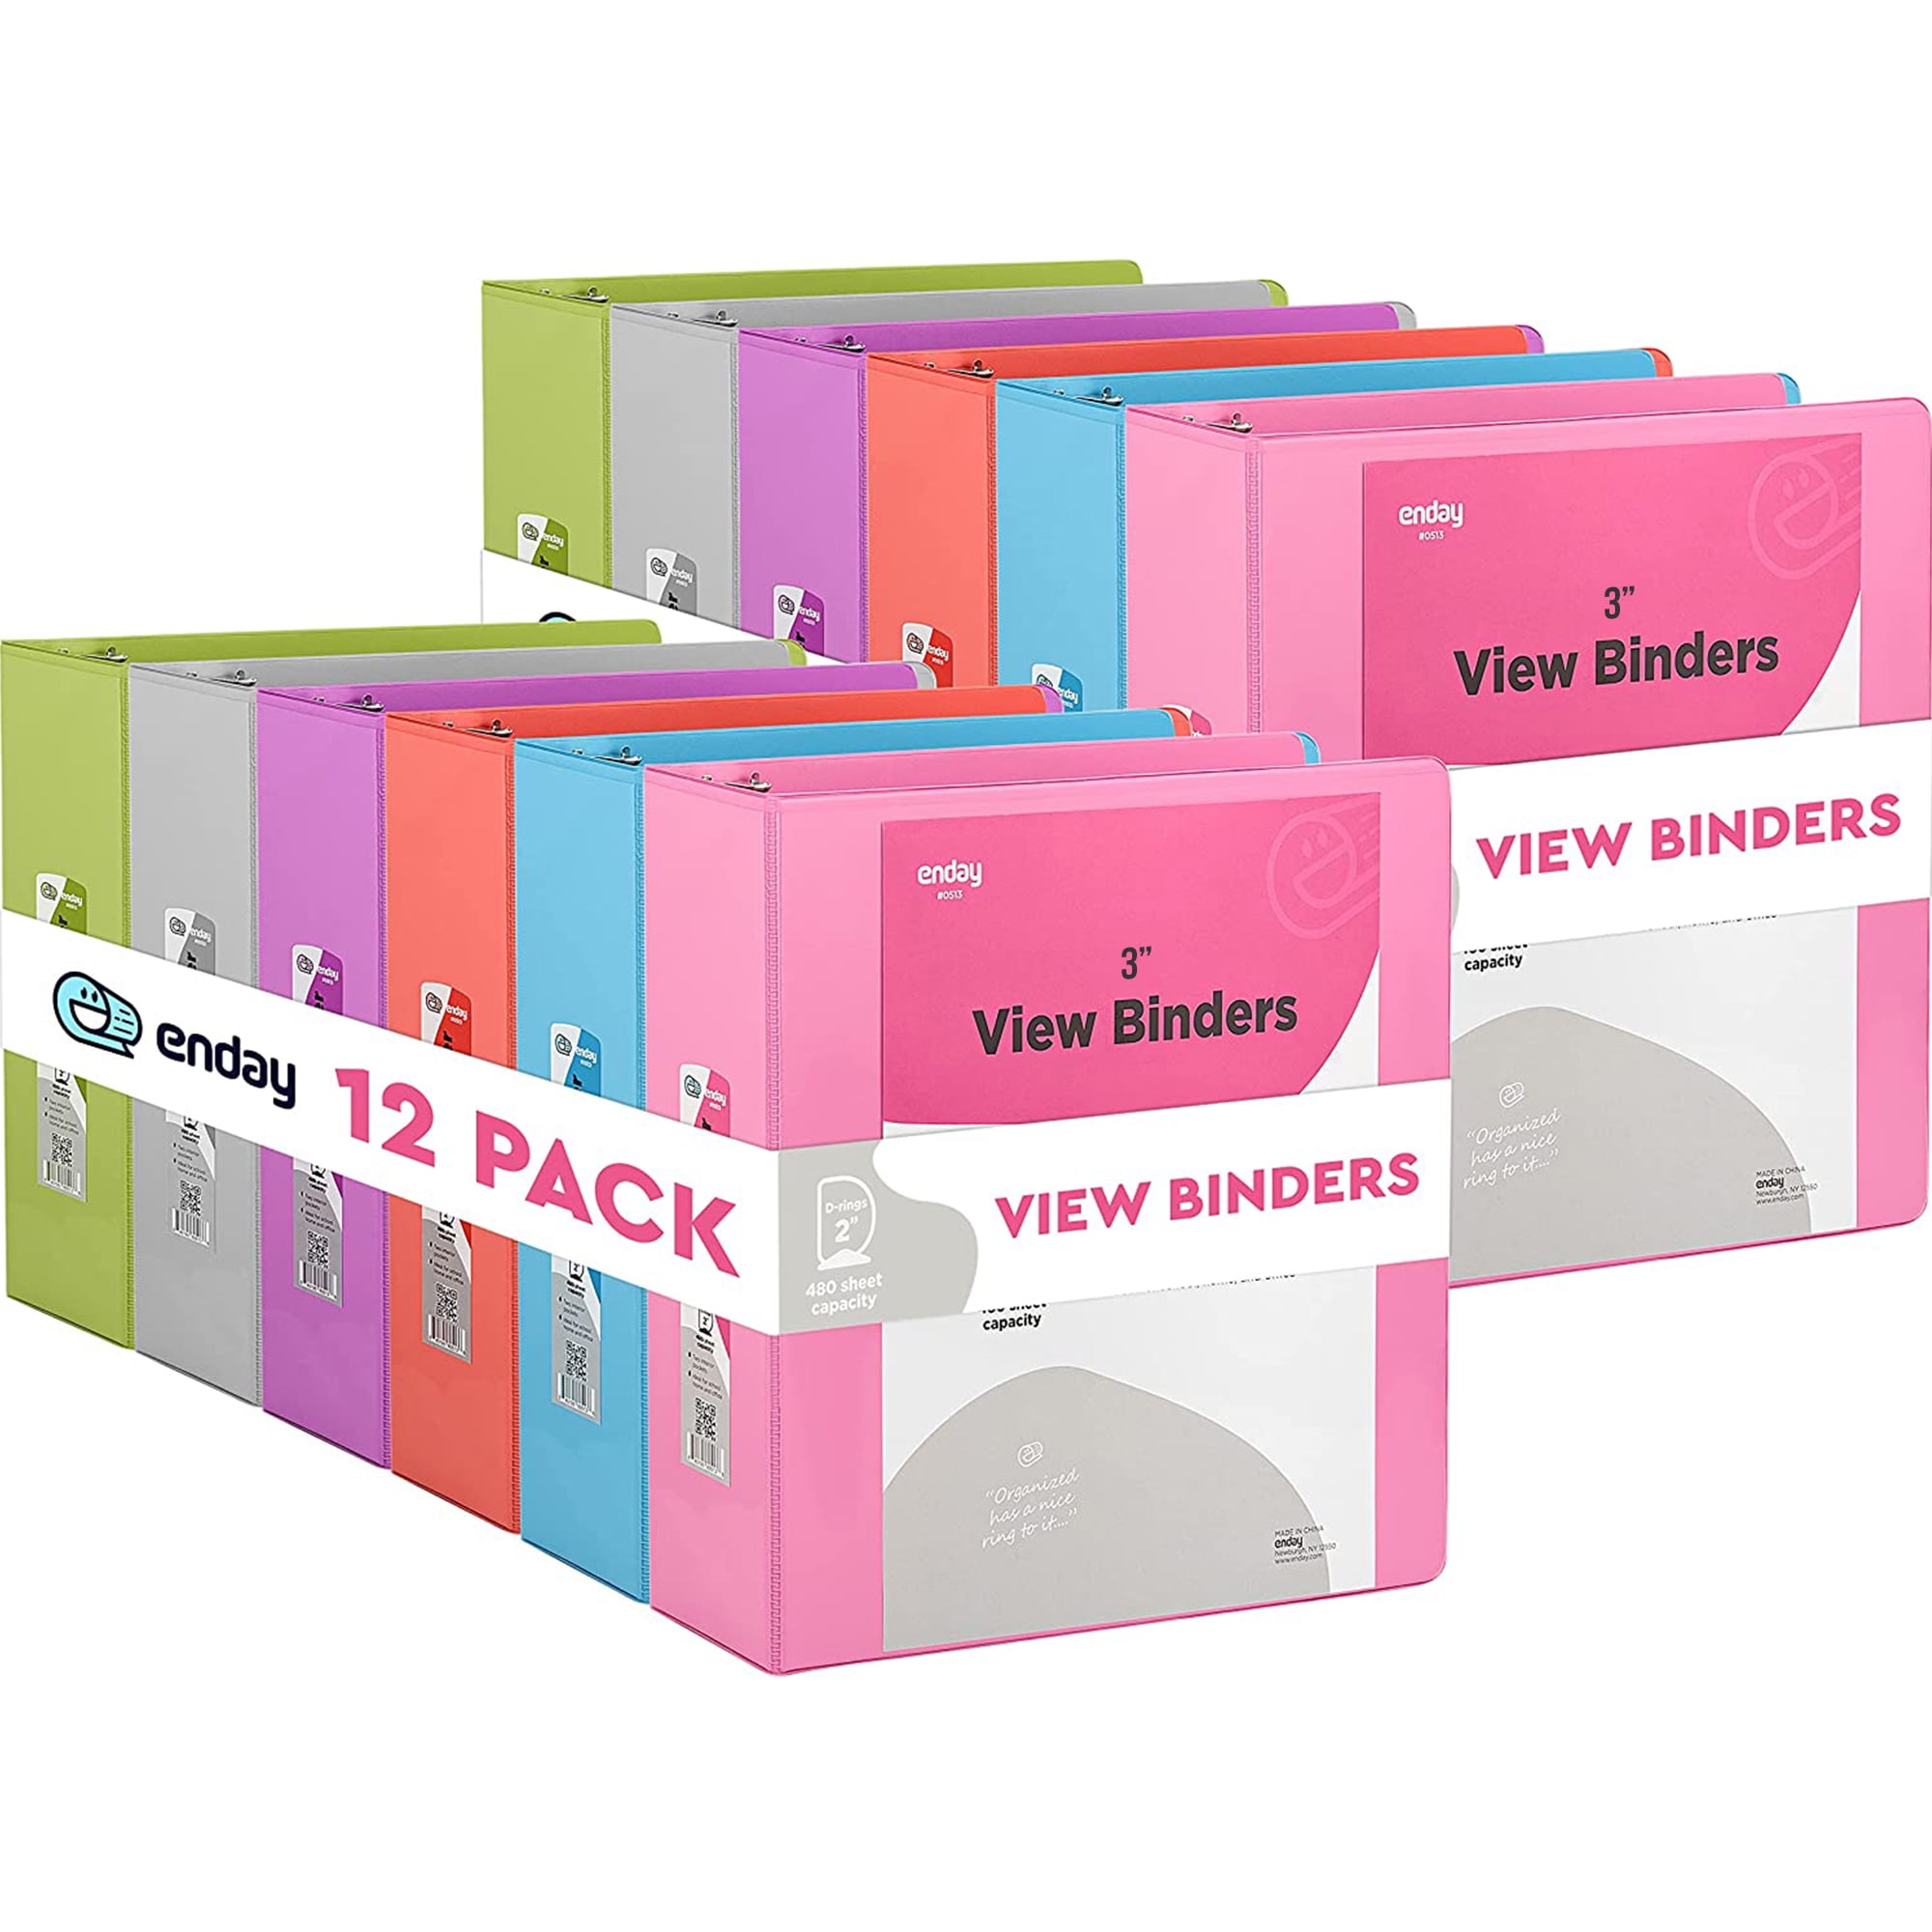 Enday 1 inch Binder 3 Ring Binders with Pockets for Home, Office, School Supplies Organization, Pink 6 PC